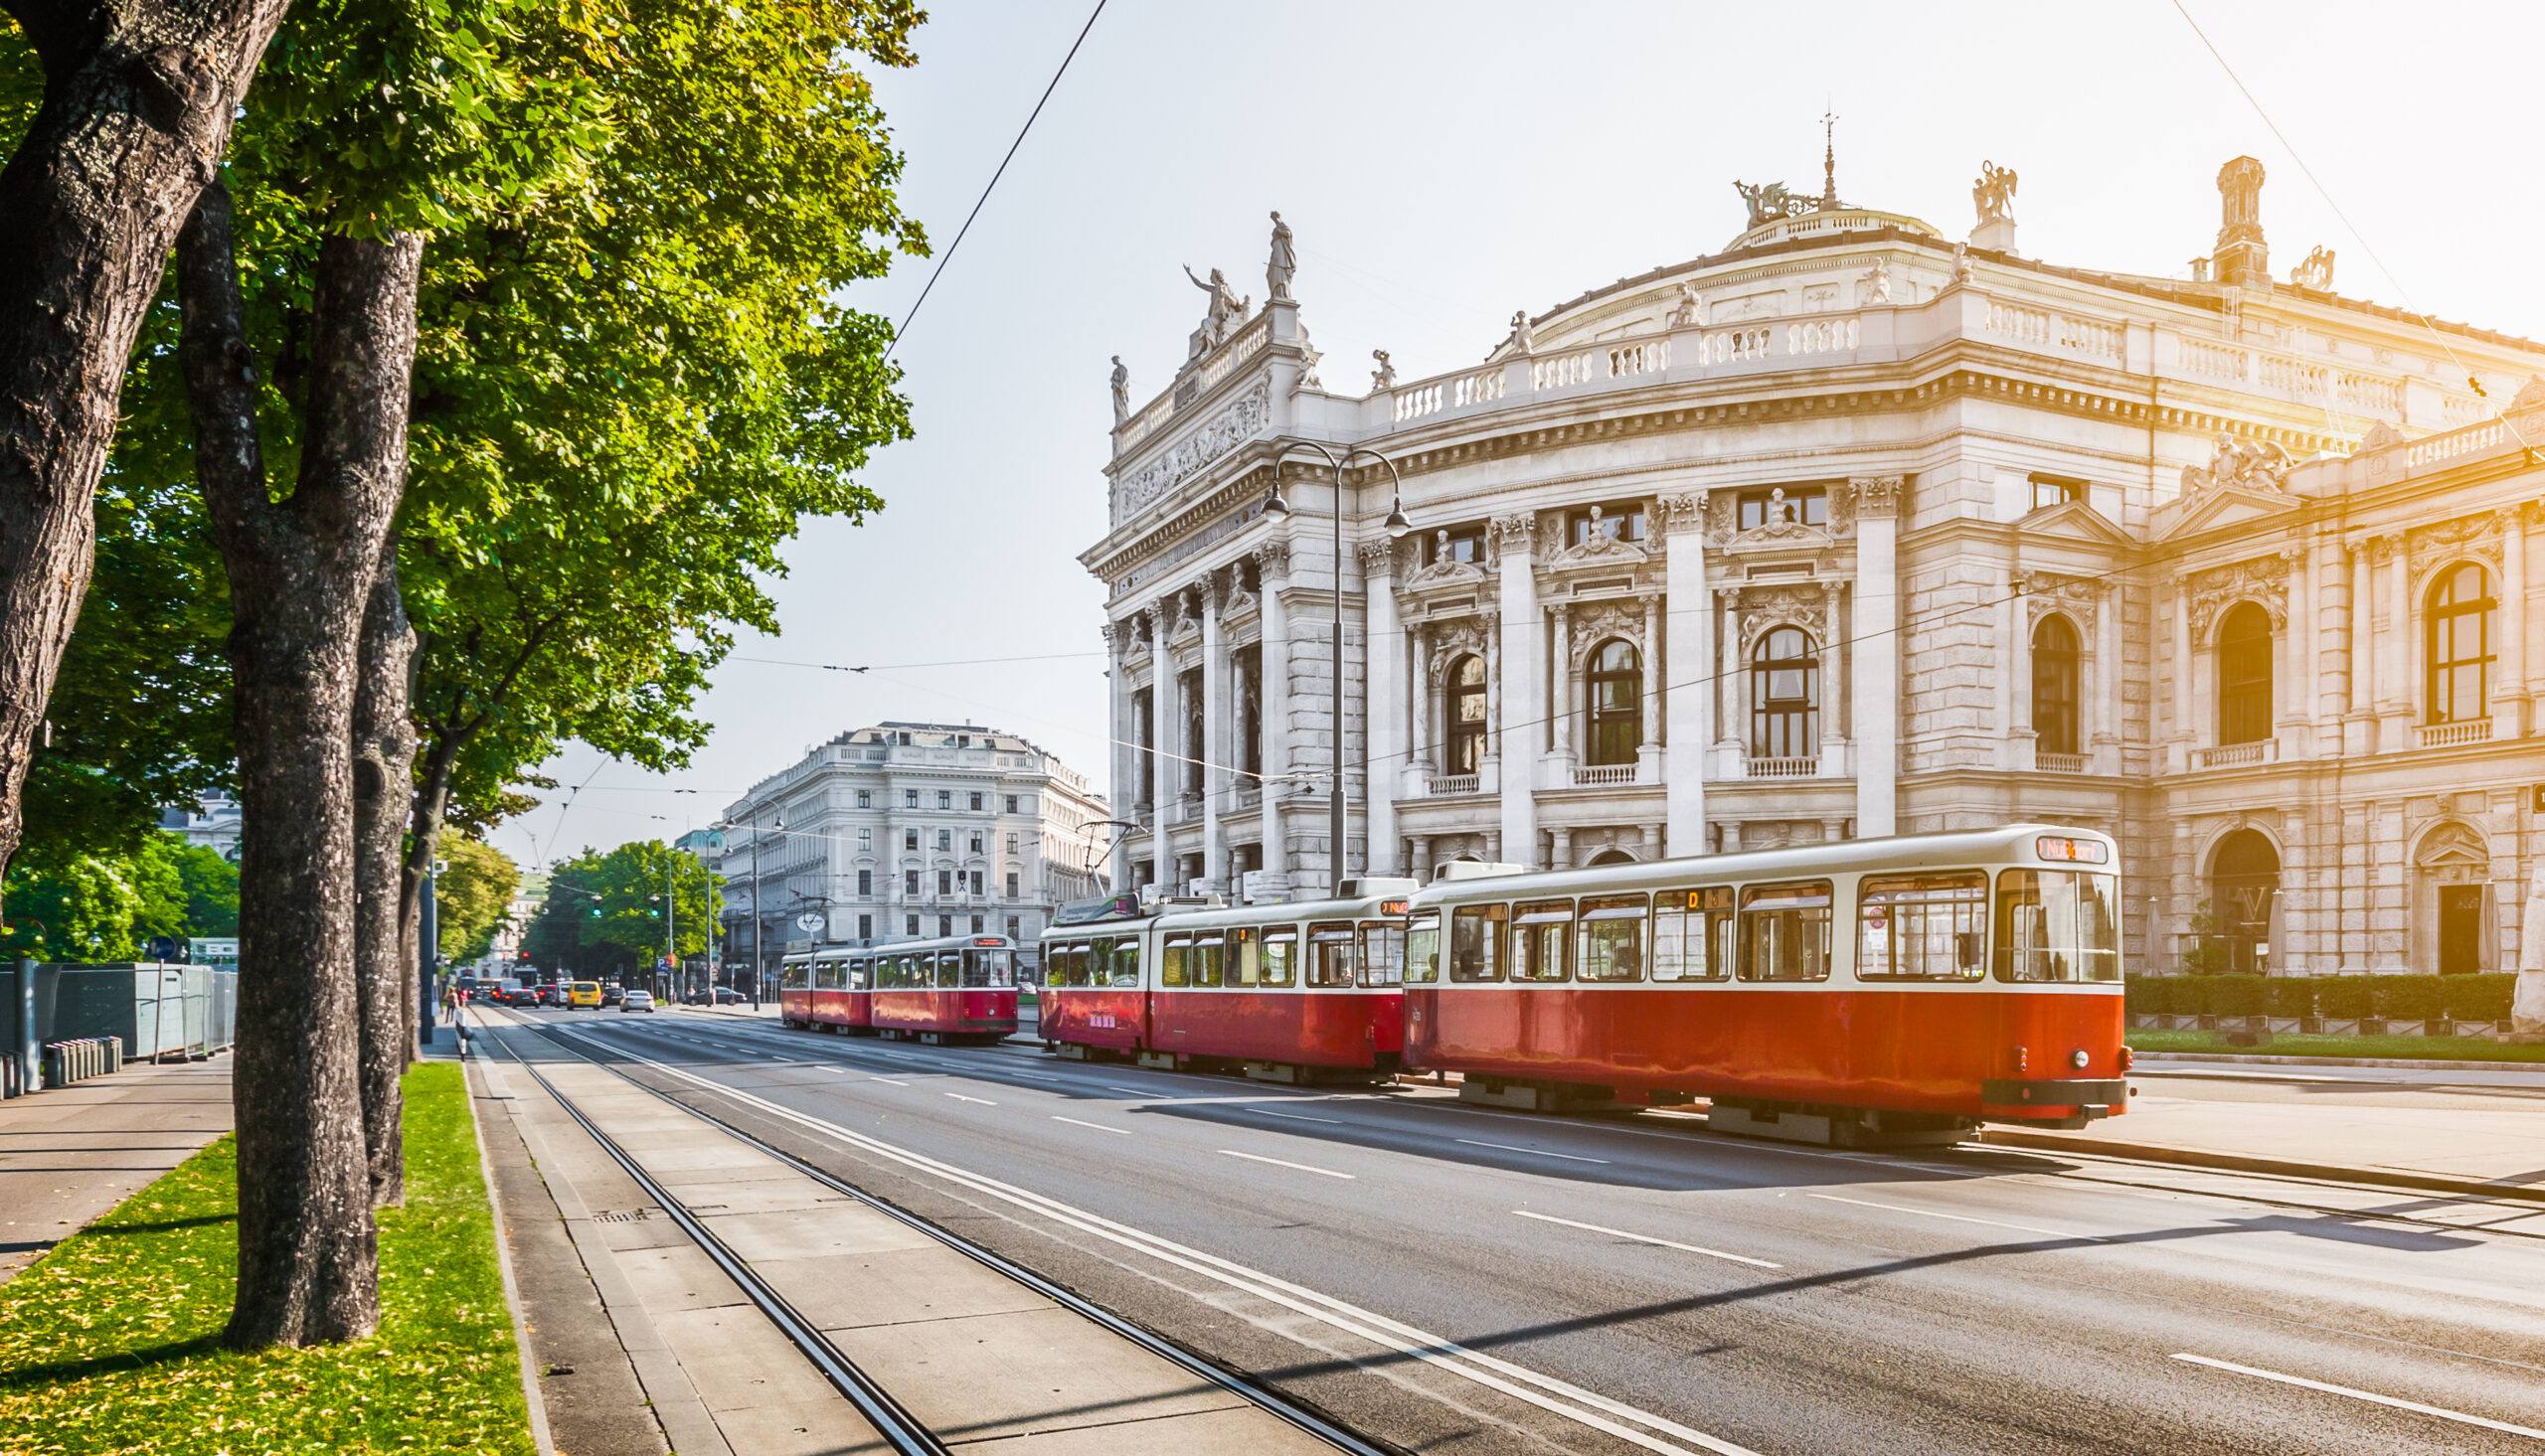 Streetview with red traditional tram and historical buildings in the background